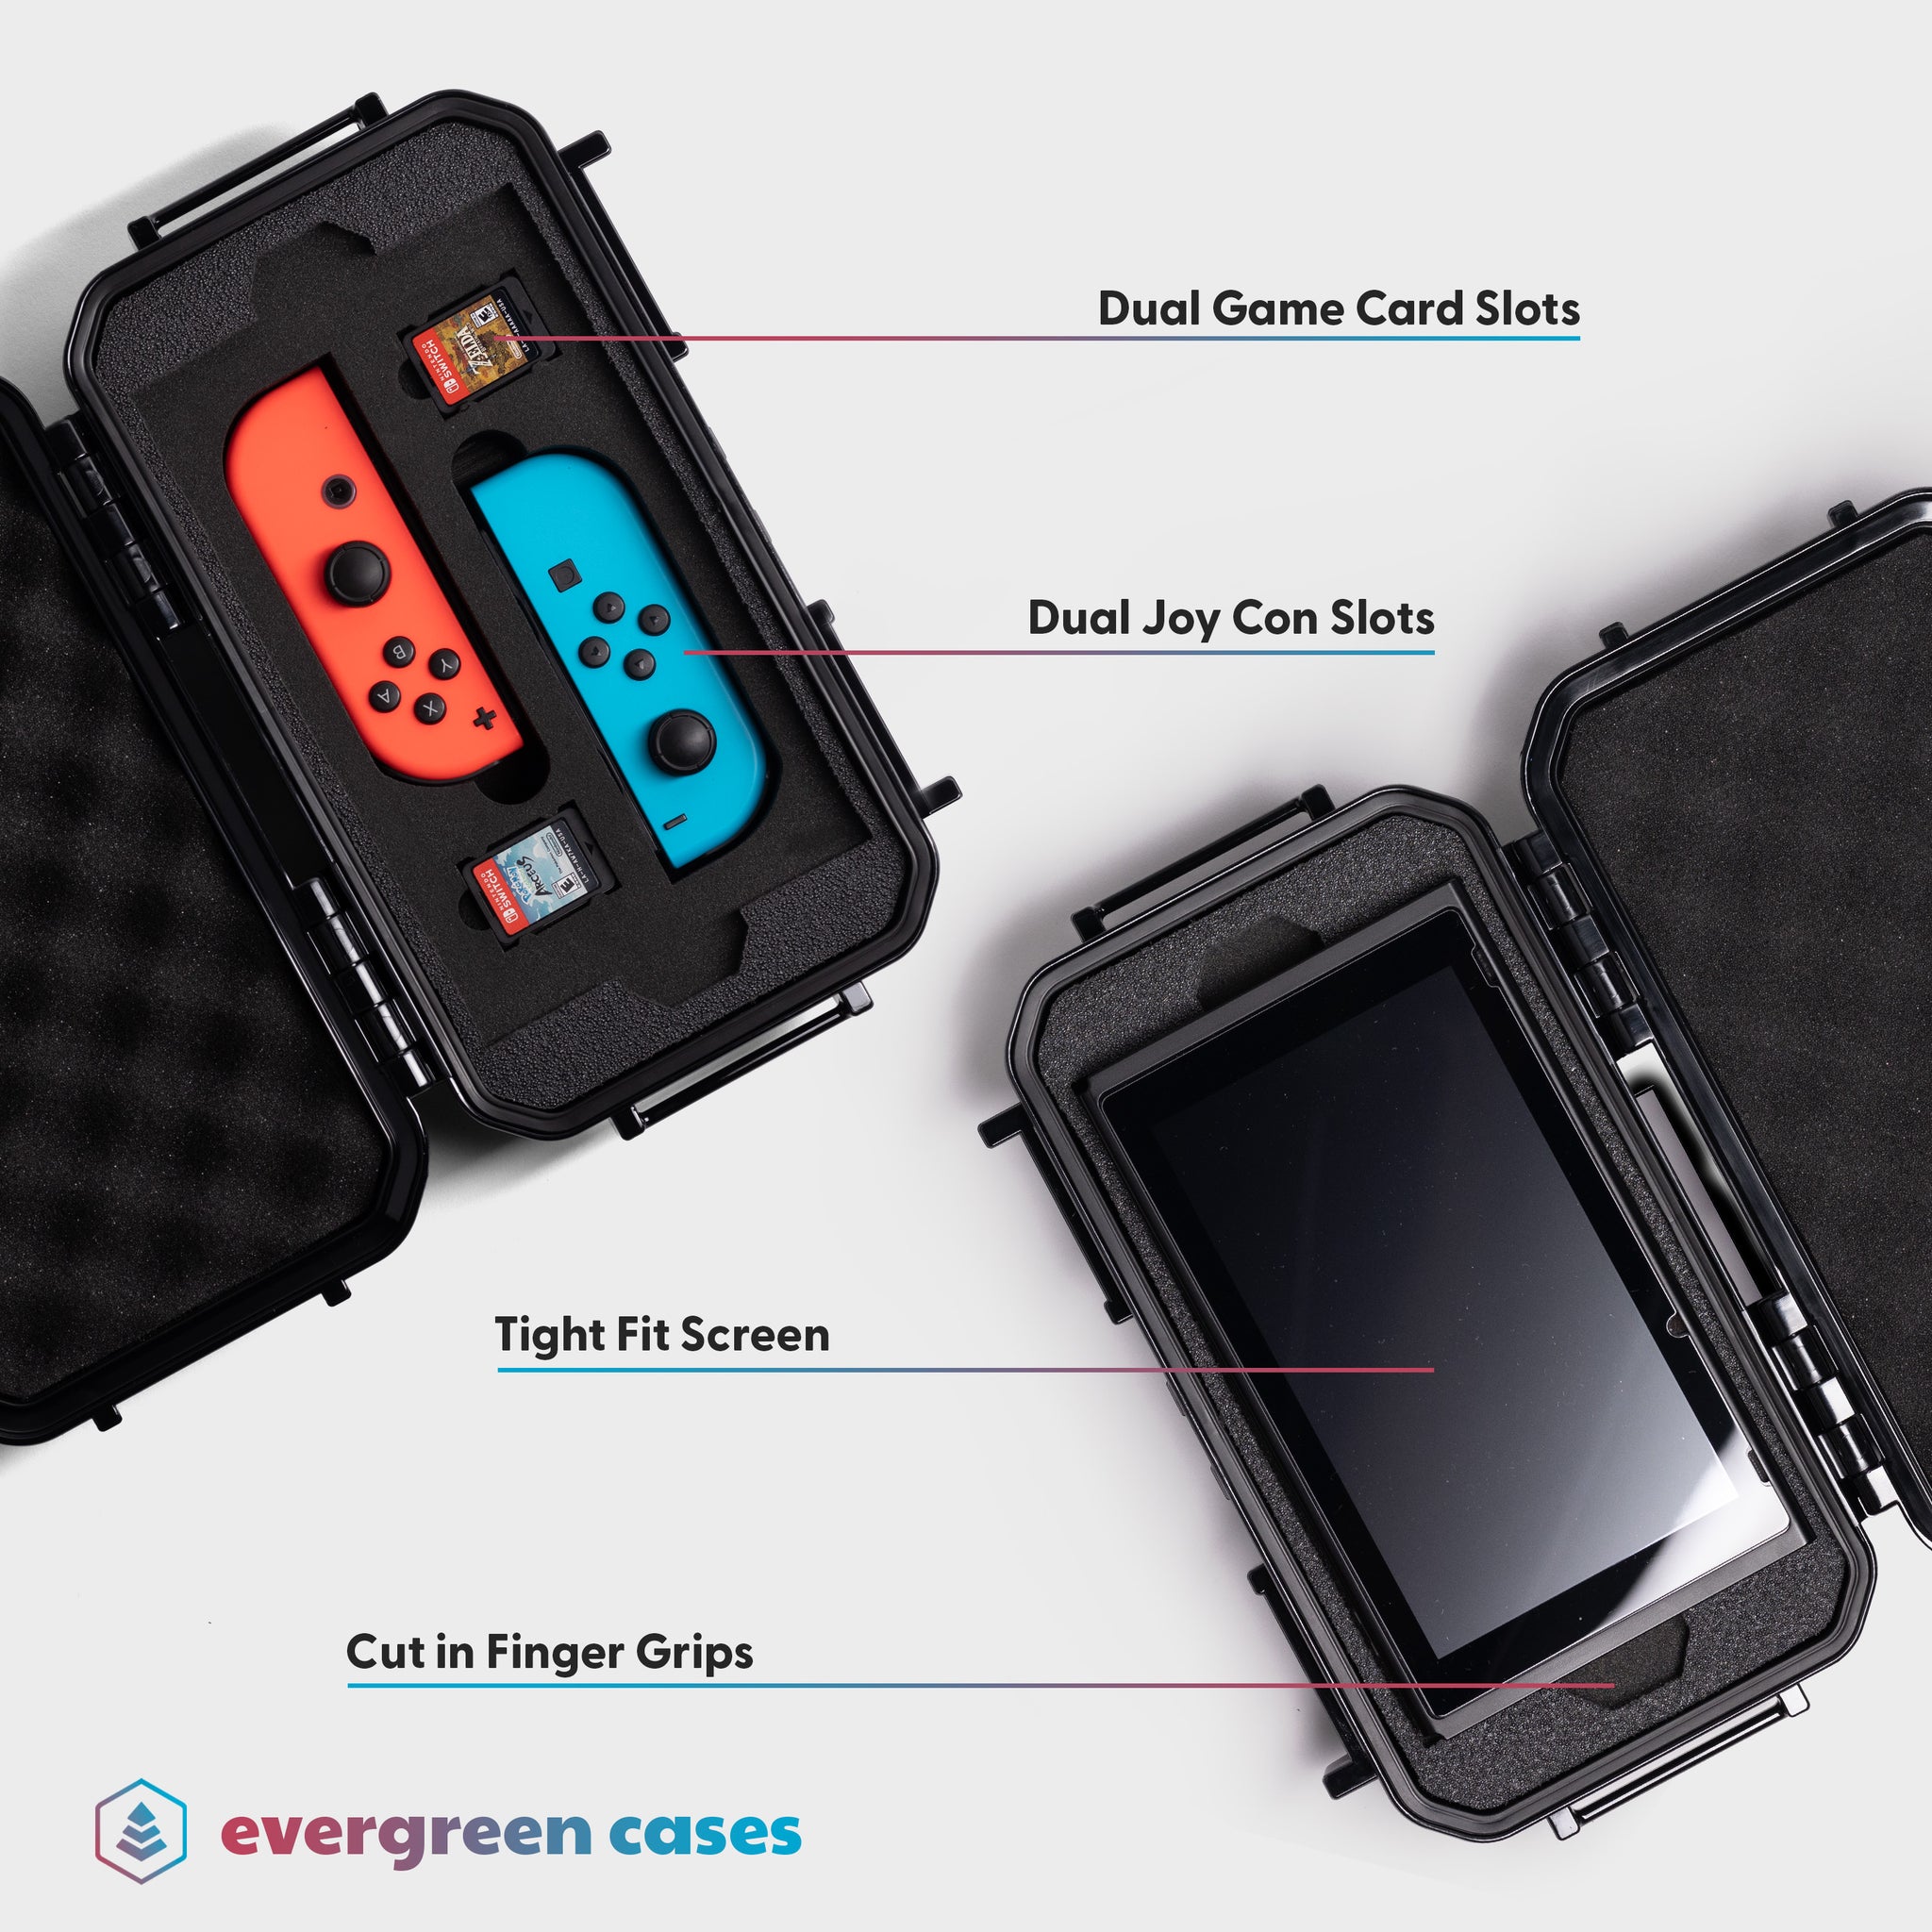 Evergreen 56 - Nintendo Switch Case (Blue/Red Edition)